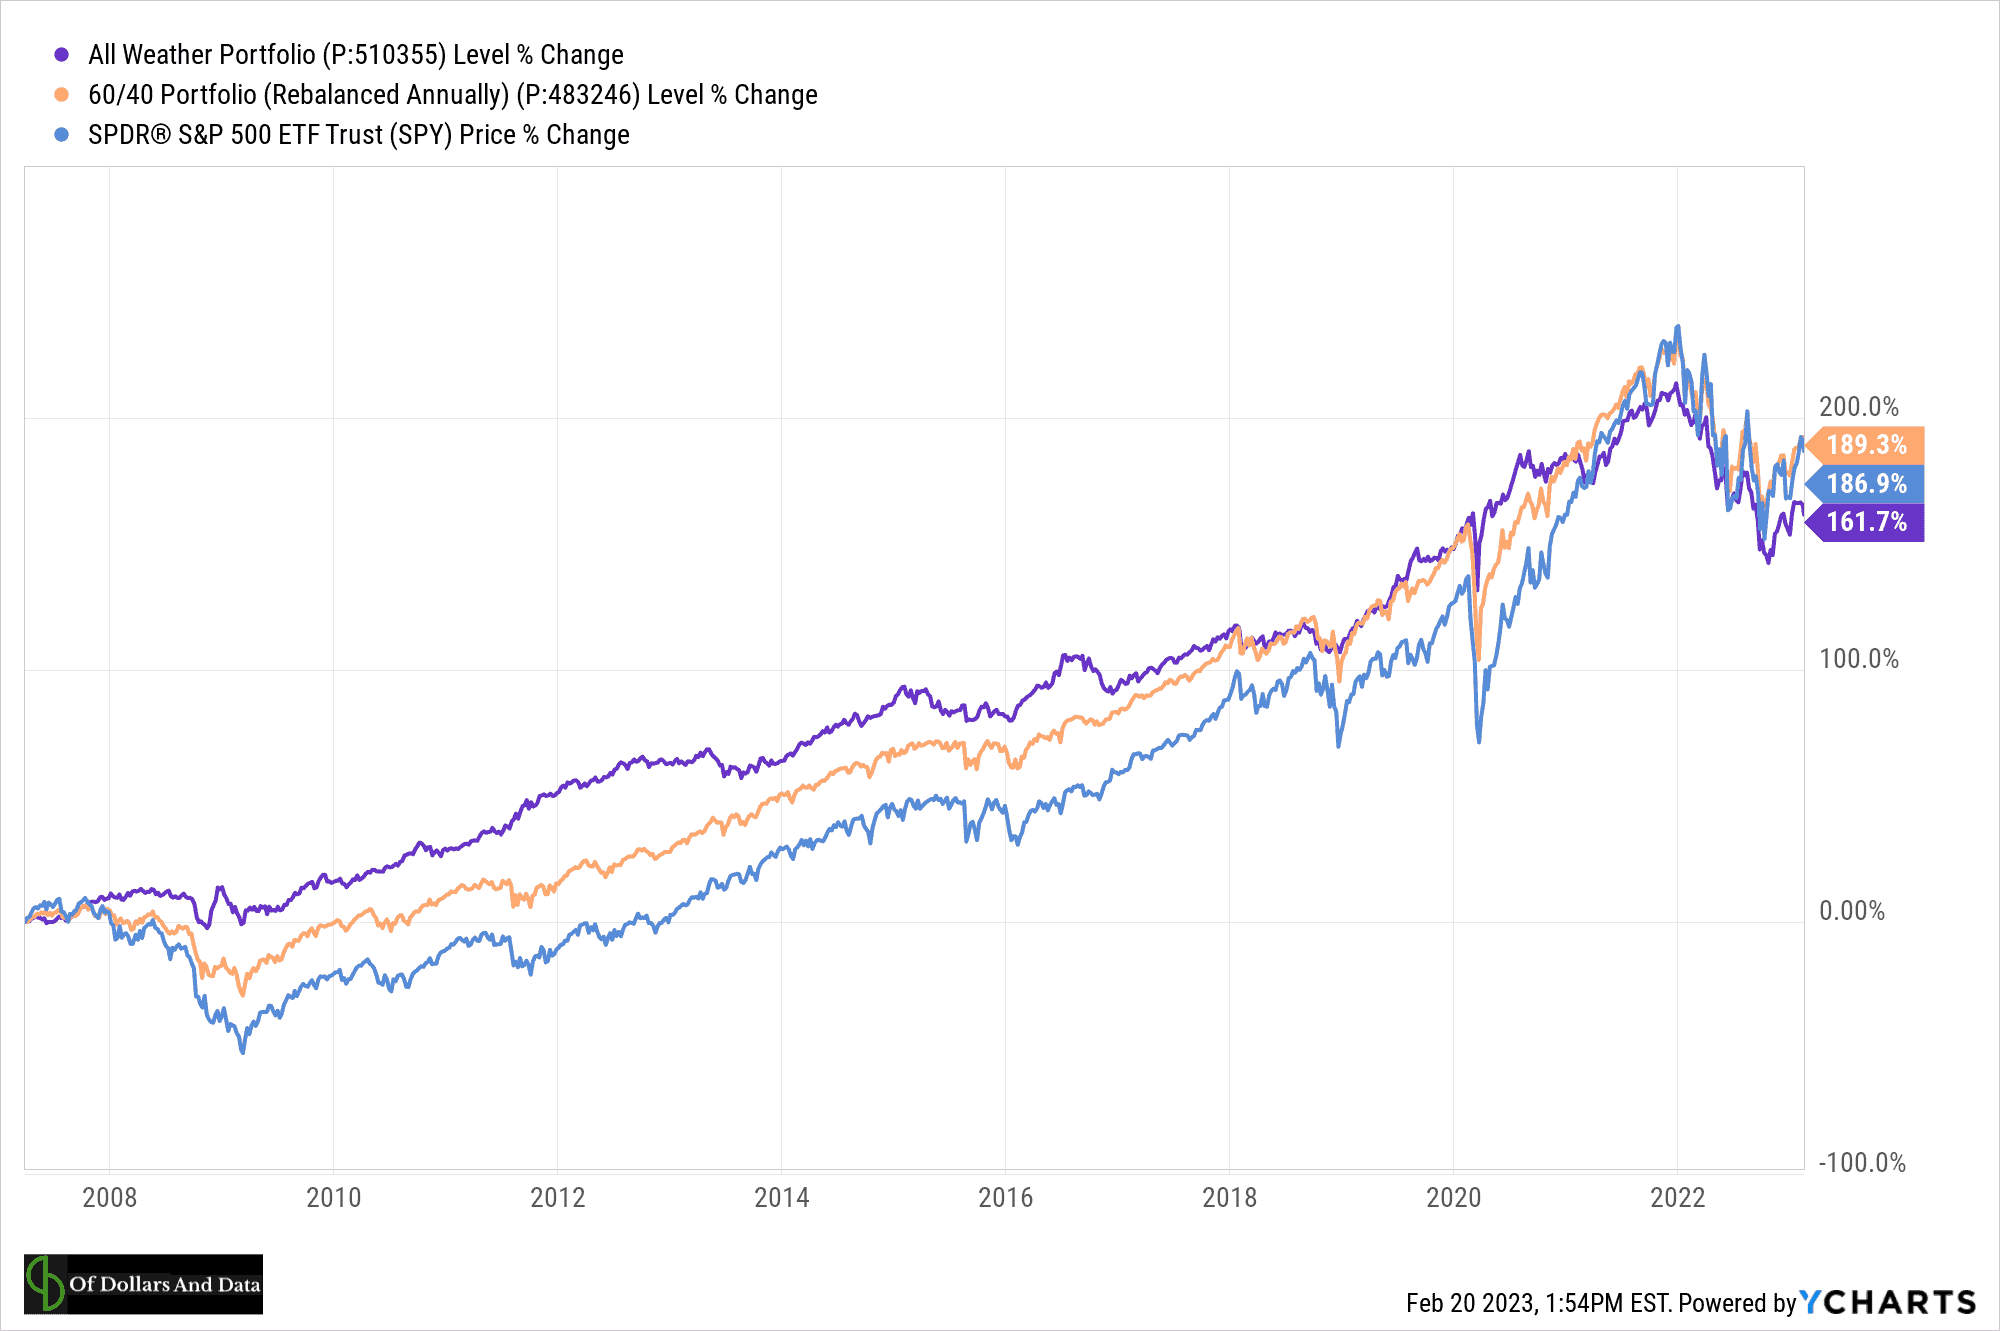 Performance of All Weather Portfolio vs a 60/40 and the S&P 500 since February 2006 to the end of 2022.